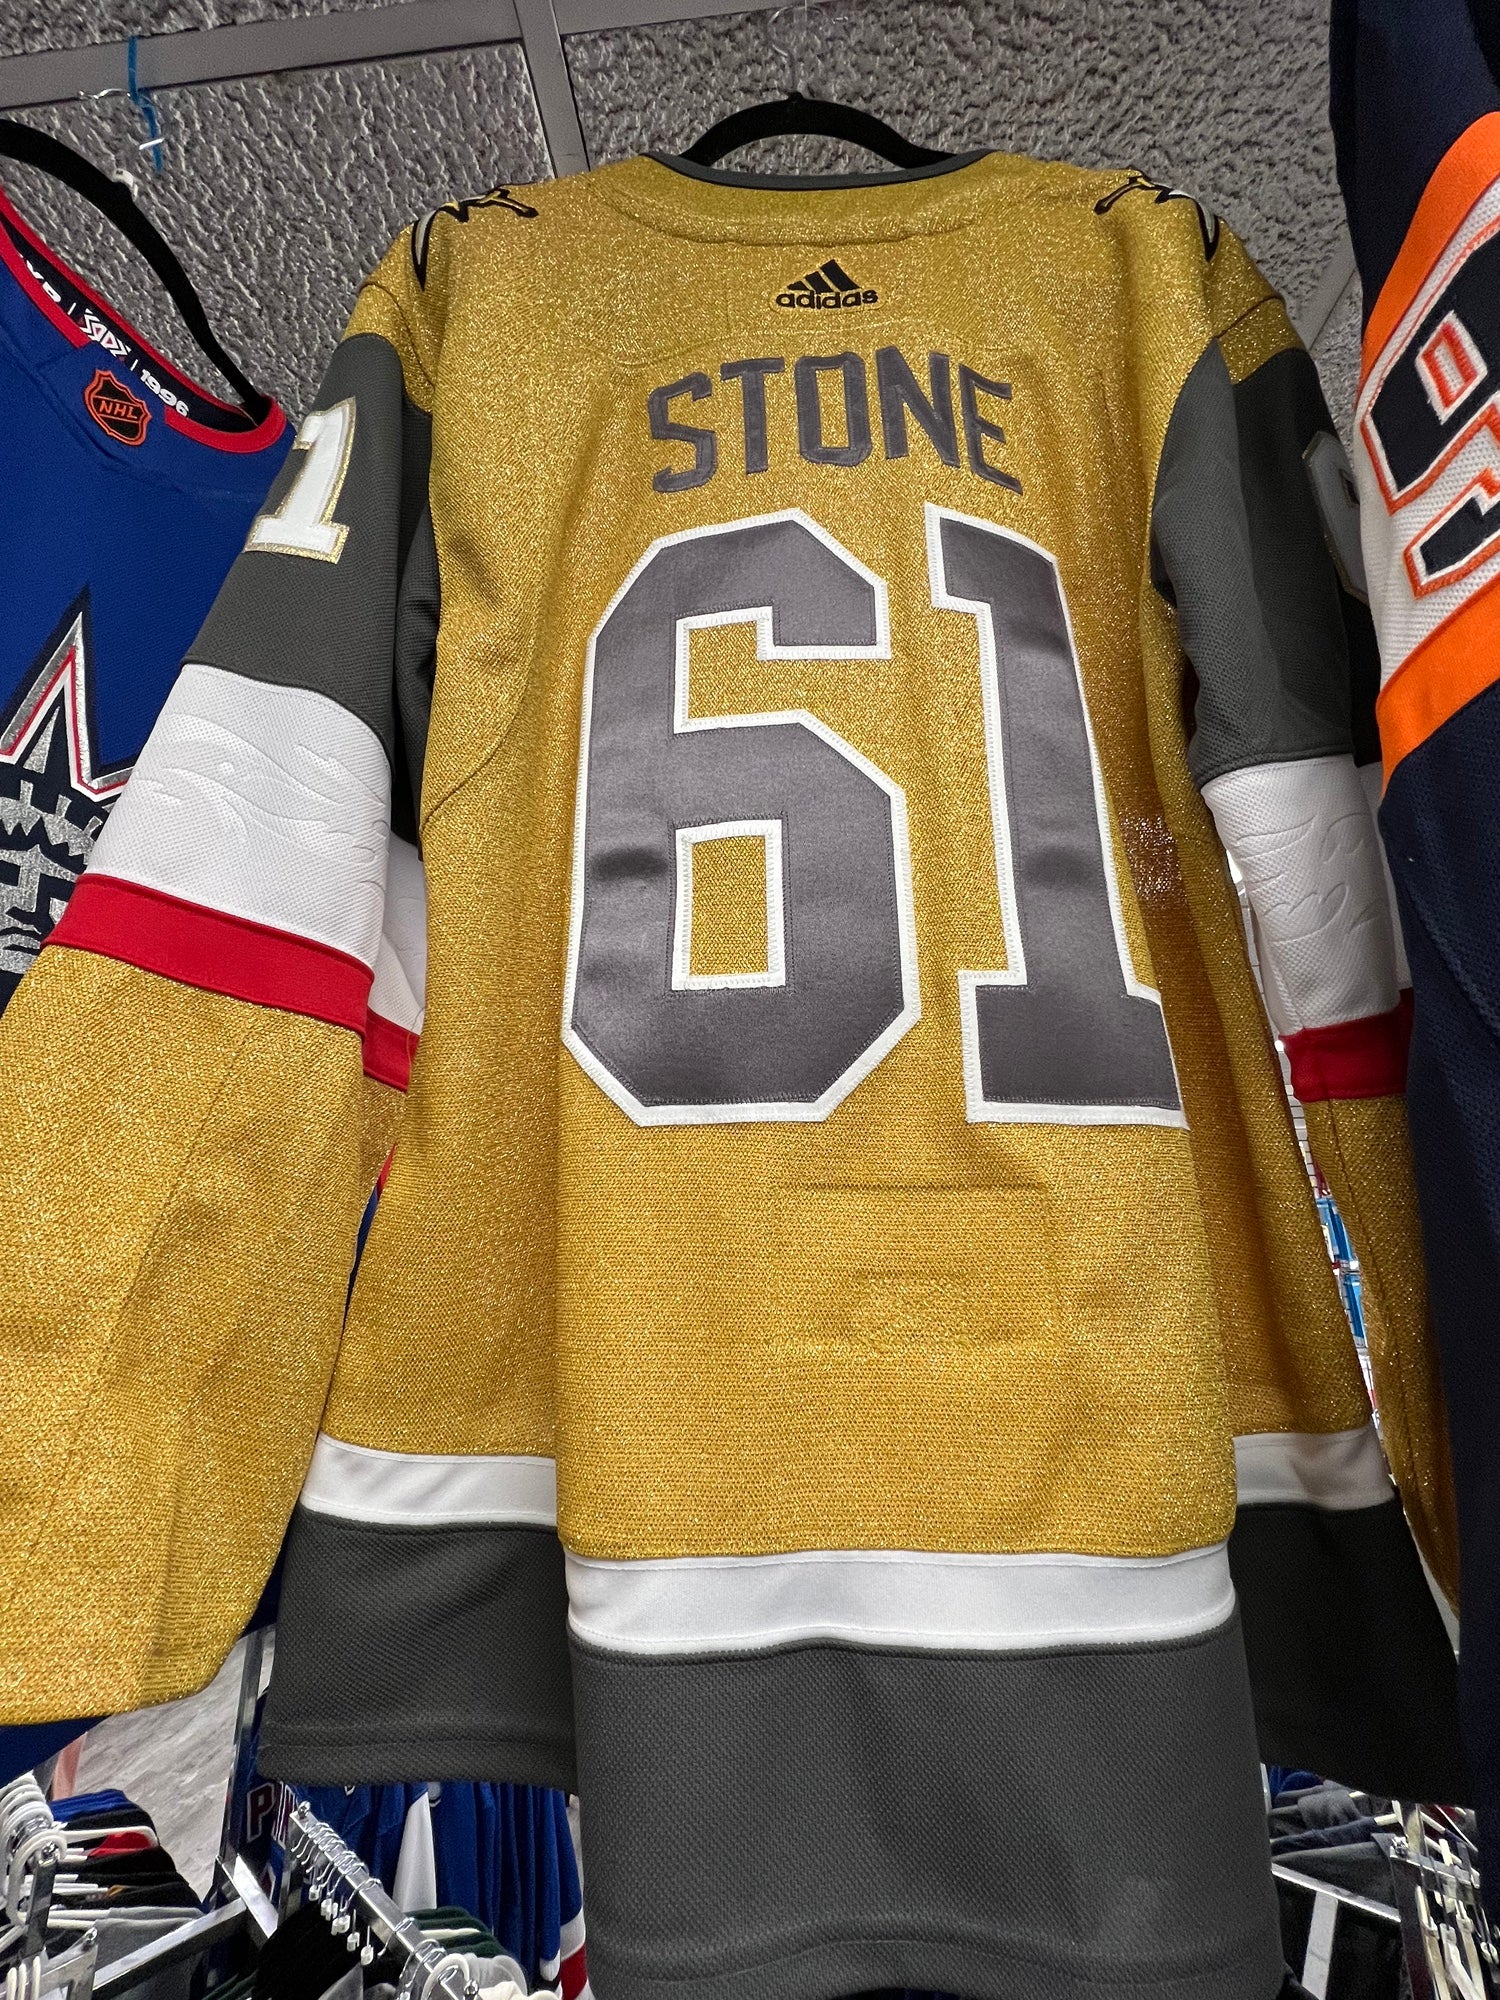 Mark Stone NHL Golden Knights Jersey for Sale in Las Vegas, NV